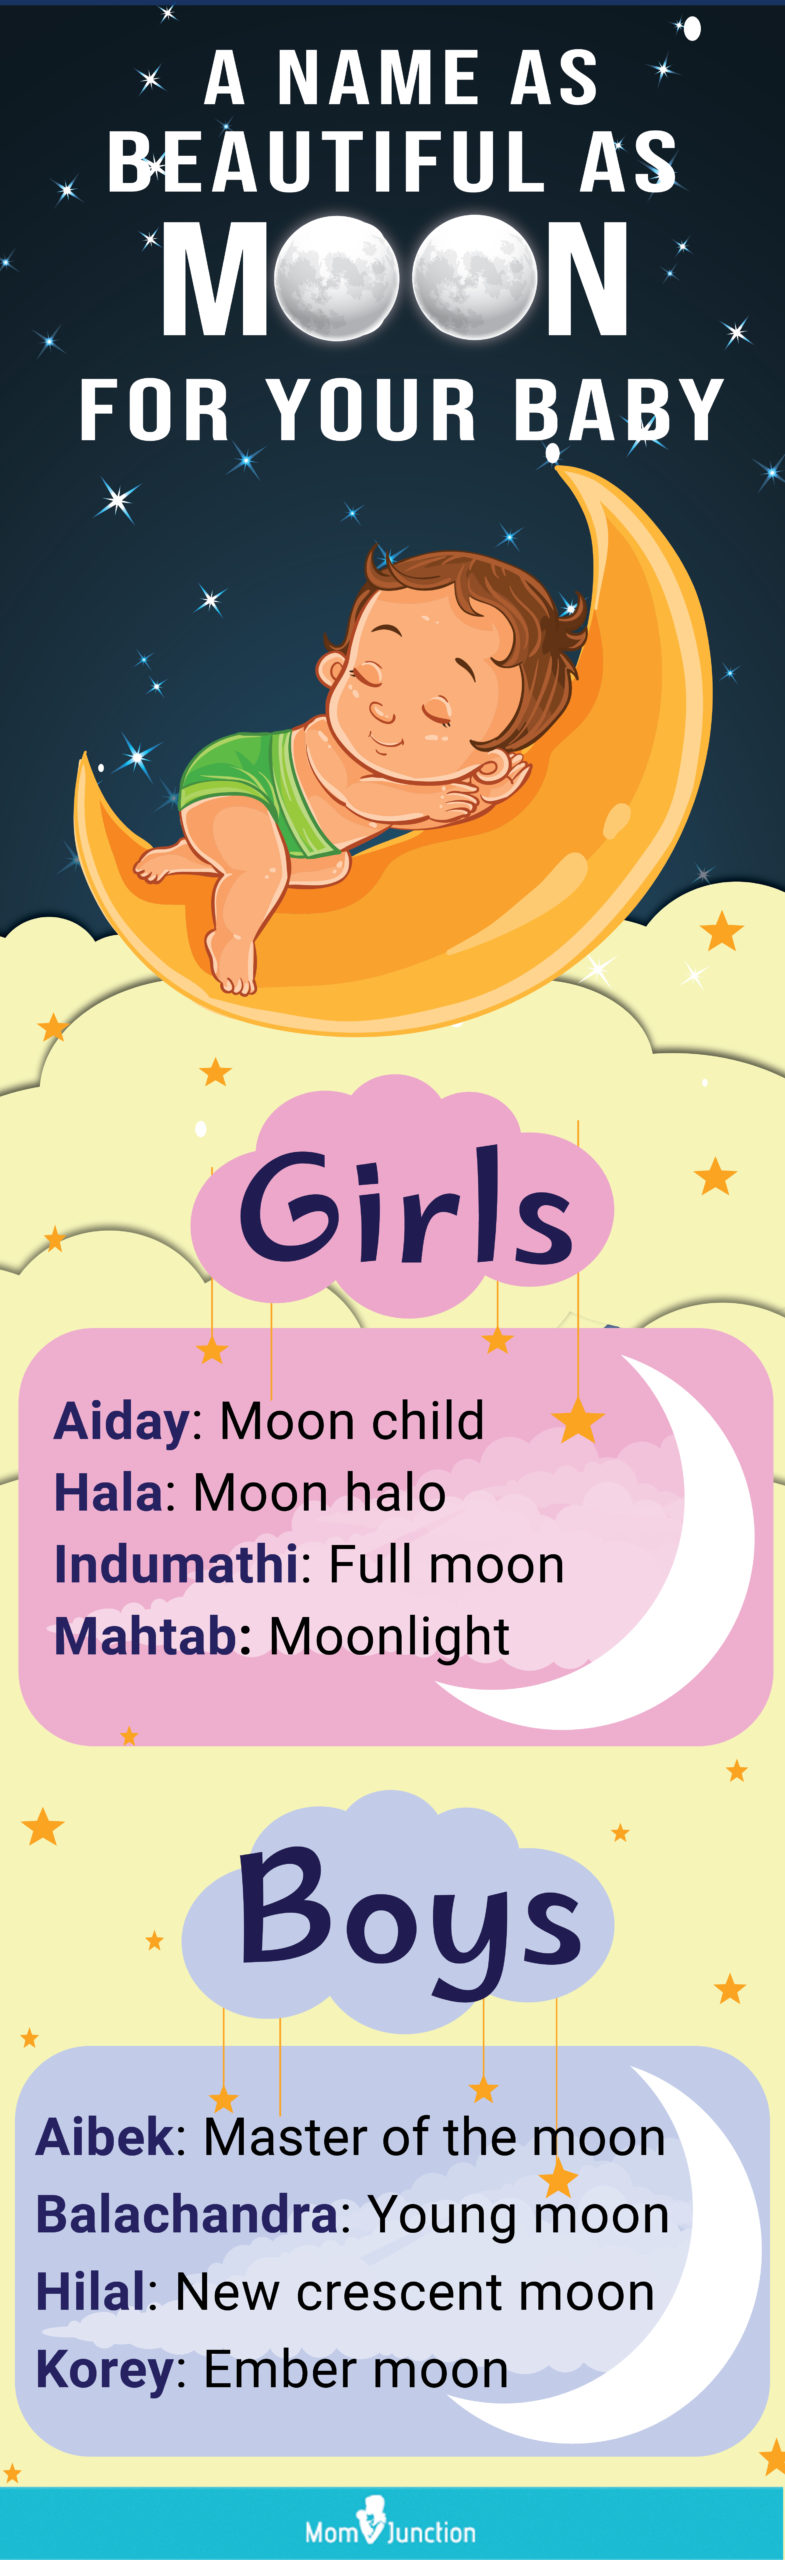 names as beautiful as moon for your baby (infographic)